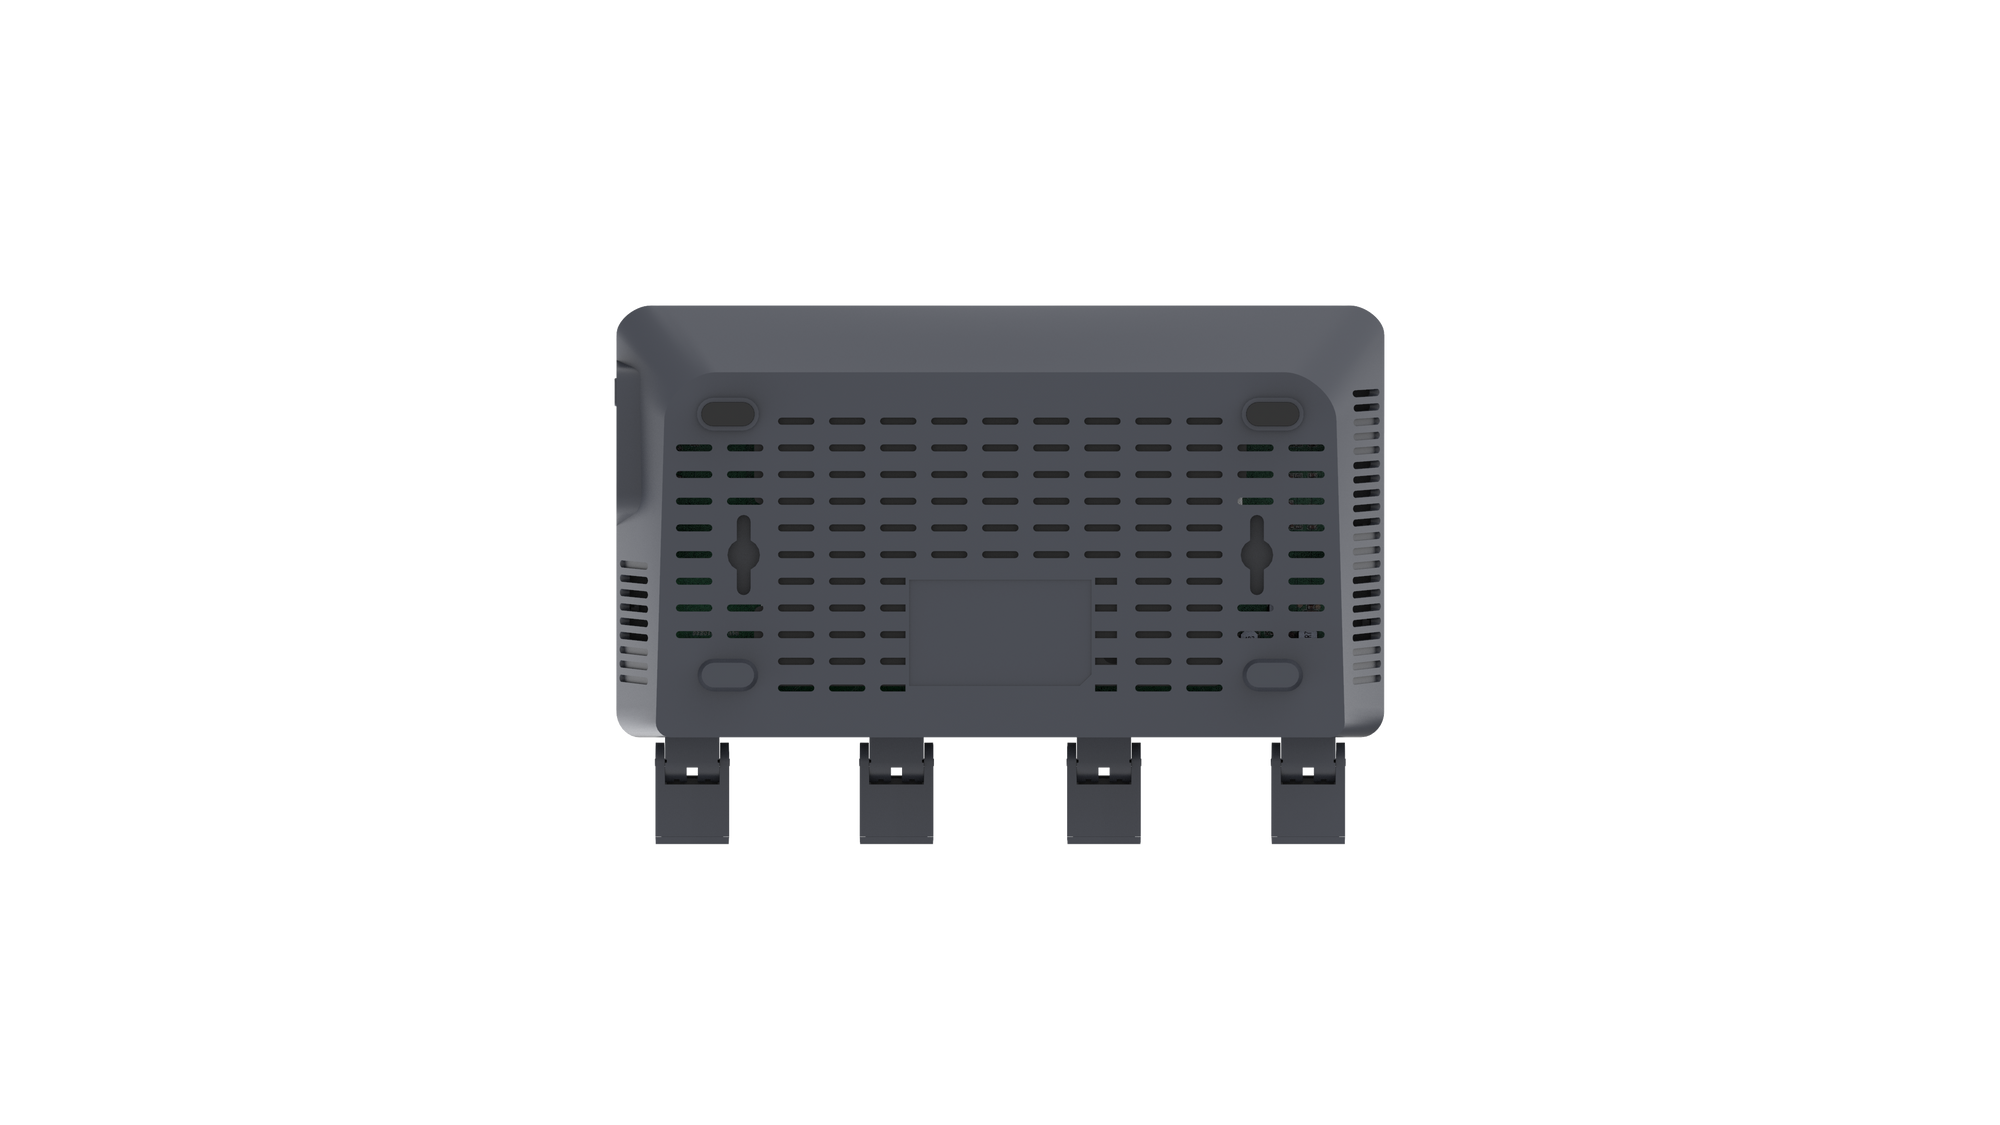 Introducing Encrouter, the World’s Most Private & Secure Fully Integrated VPN Router